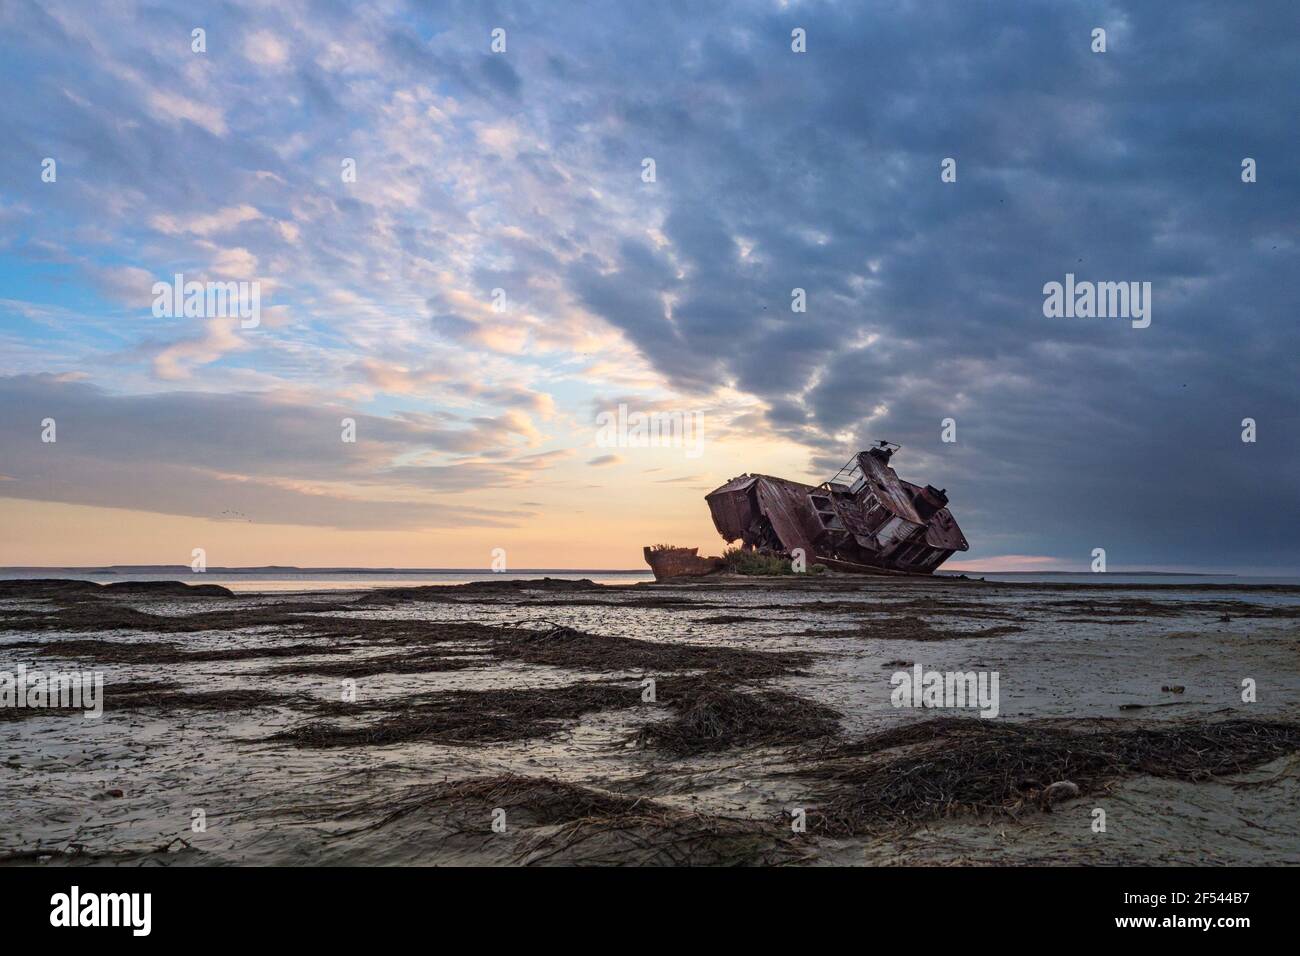 An old abandoned ship on the shore of the drying up Aral Sea. Kazakhstan. Abandoned ships sawn for scrap by local residents. Ecological disaster of th Stock Photo